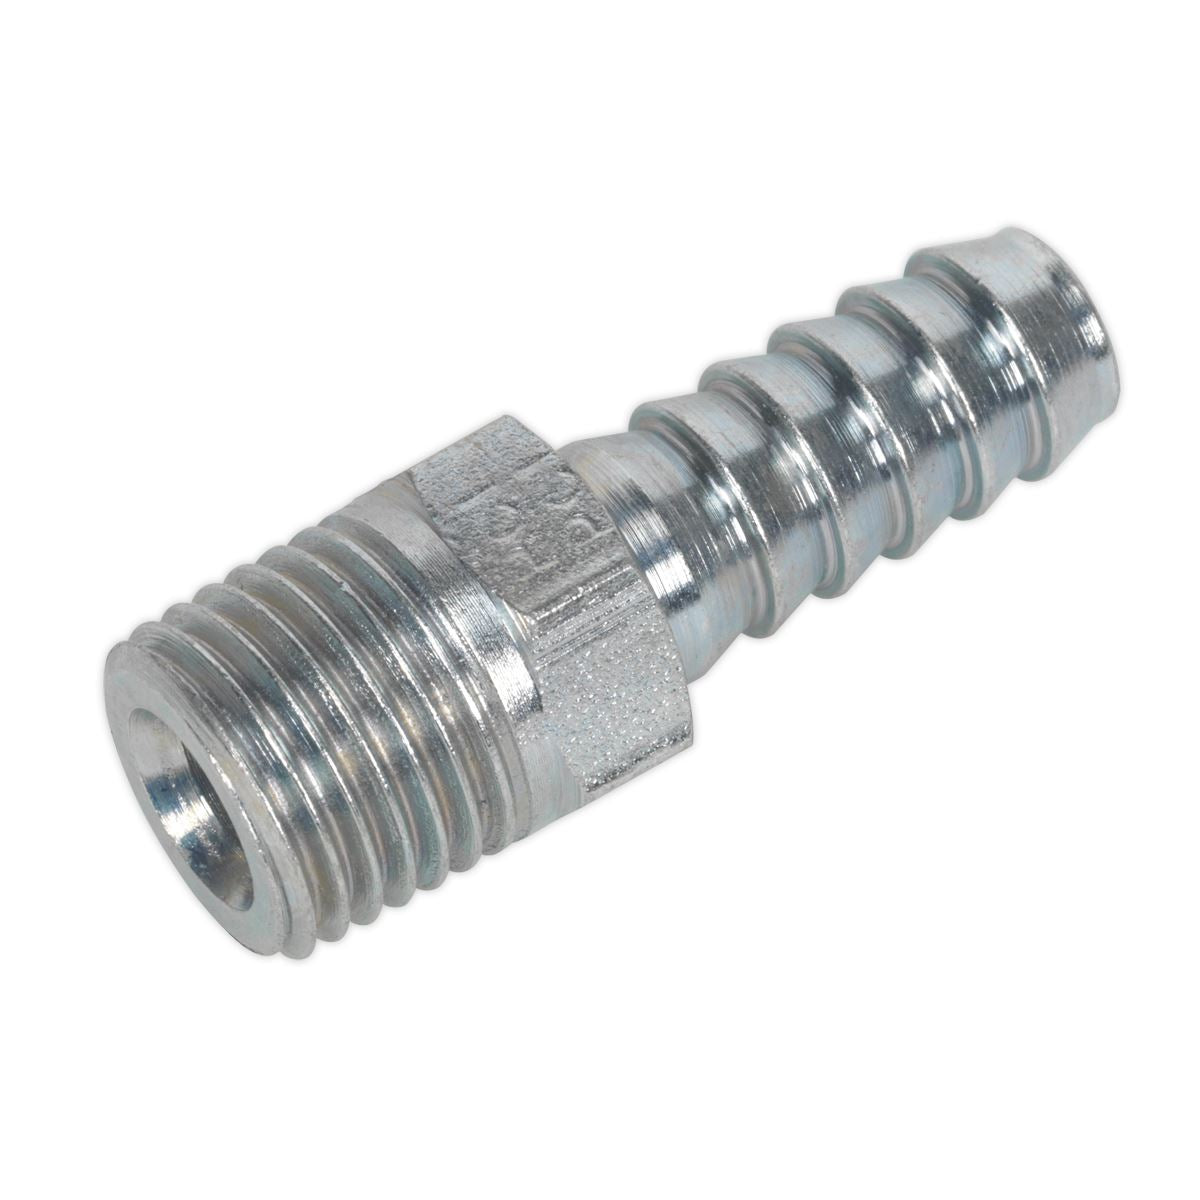 PCL Screwed Tailpiece Male 1/4"BSPT - 5/16" Hose Pack of 5